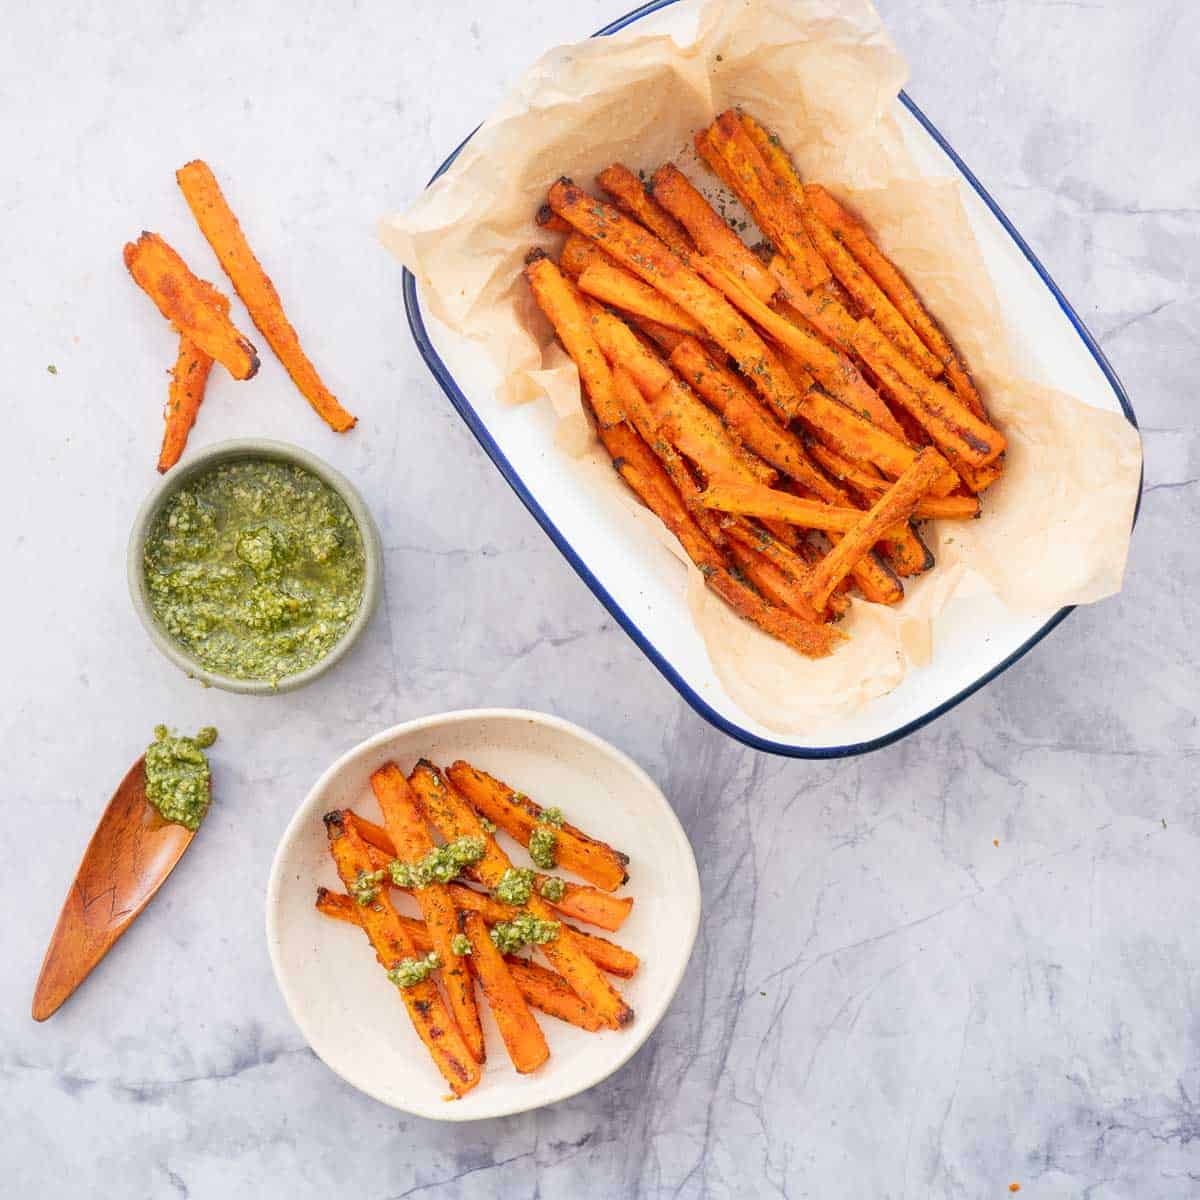 A serving dish filled with carrot fries next to a bowl of pesto sauce, and a side plate of carrot fries drizzled with the green pesto.